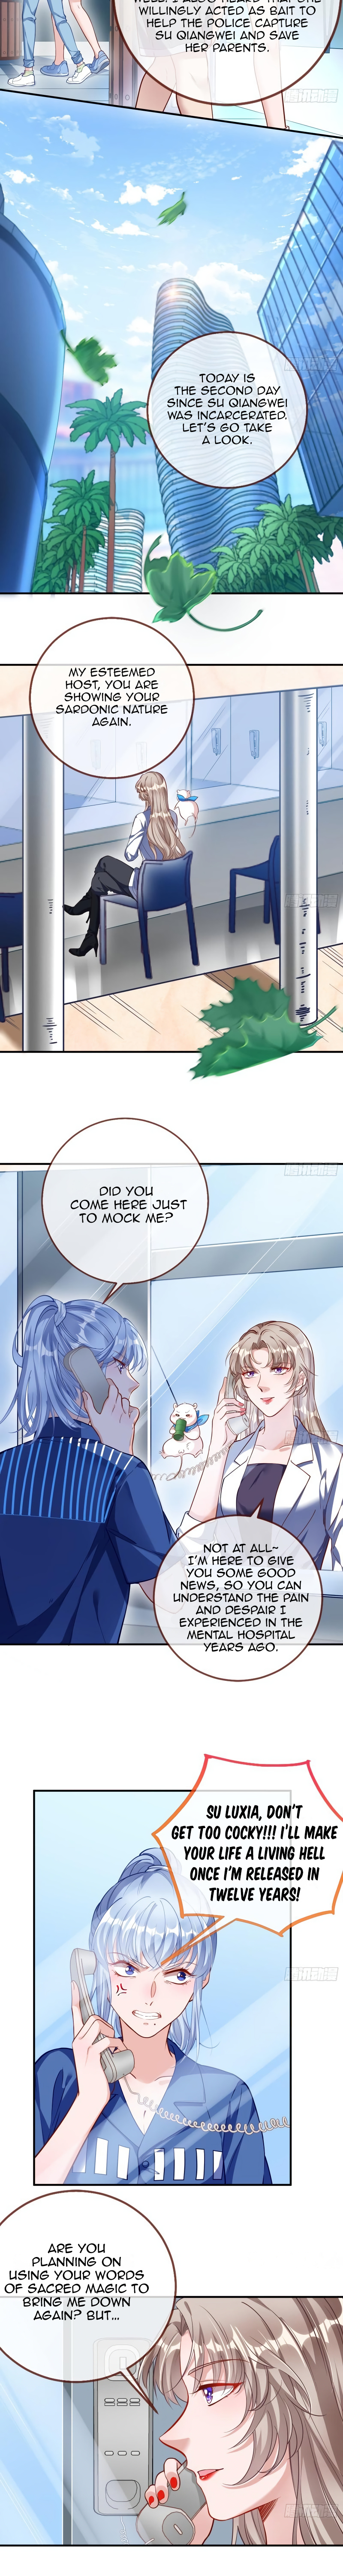 Cheating Men Must Die Vol.18 Chapter 407: The Real Heiress Wants To Make A Comeback - Tears Behind Bars - Picture 3